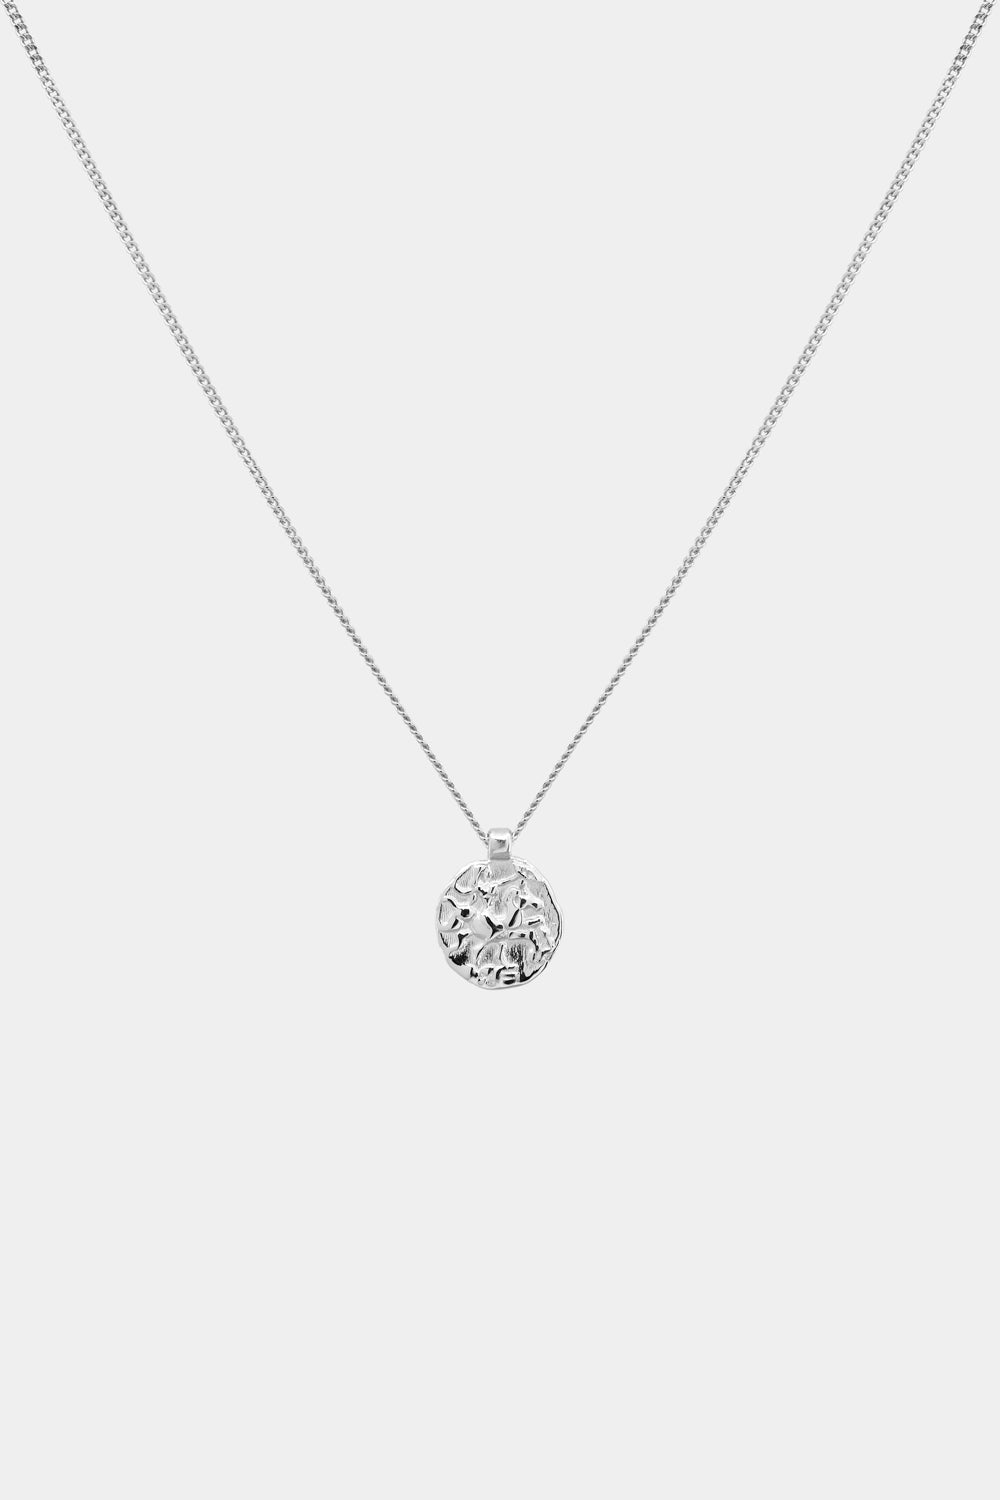 Mini Coin Necklace | Silver or 9K White Gold